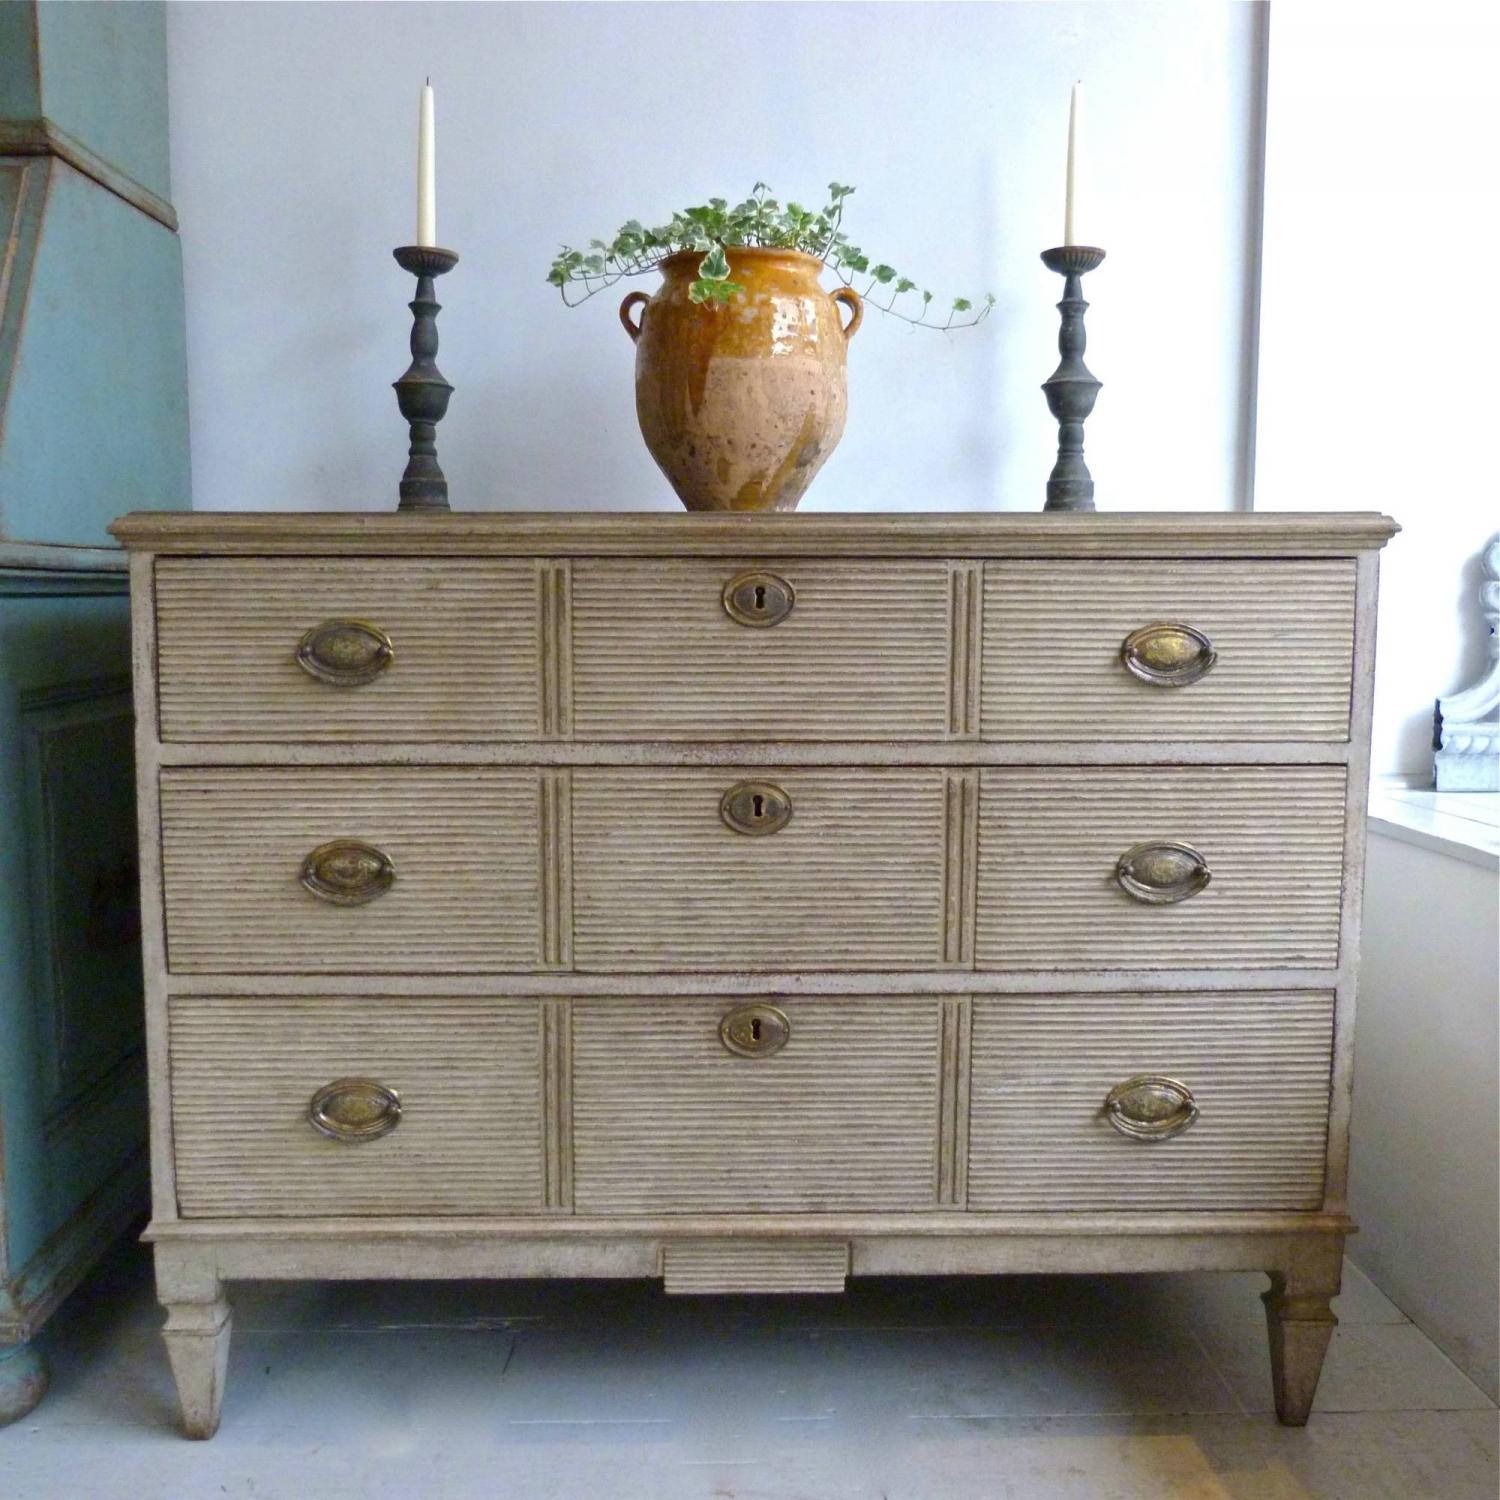 SWEDISH GUSTAVIAN STYLE CHEST OF DRAWERS